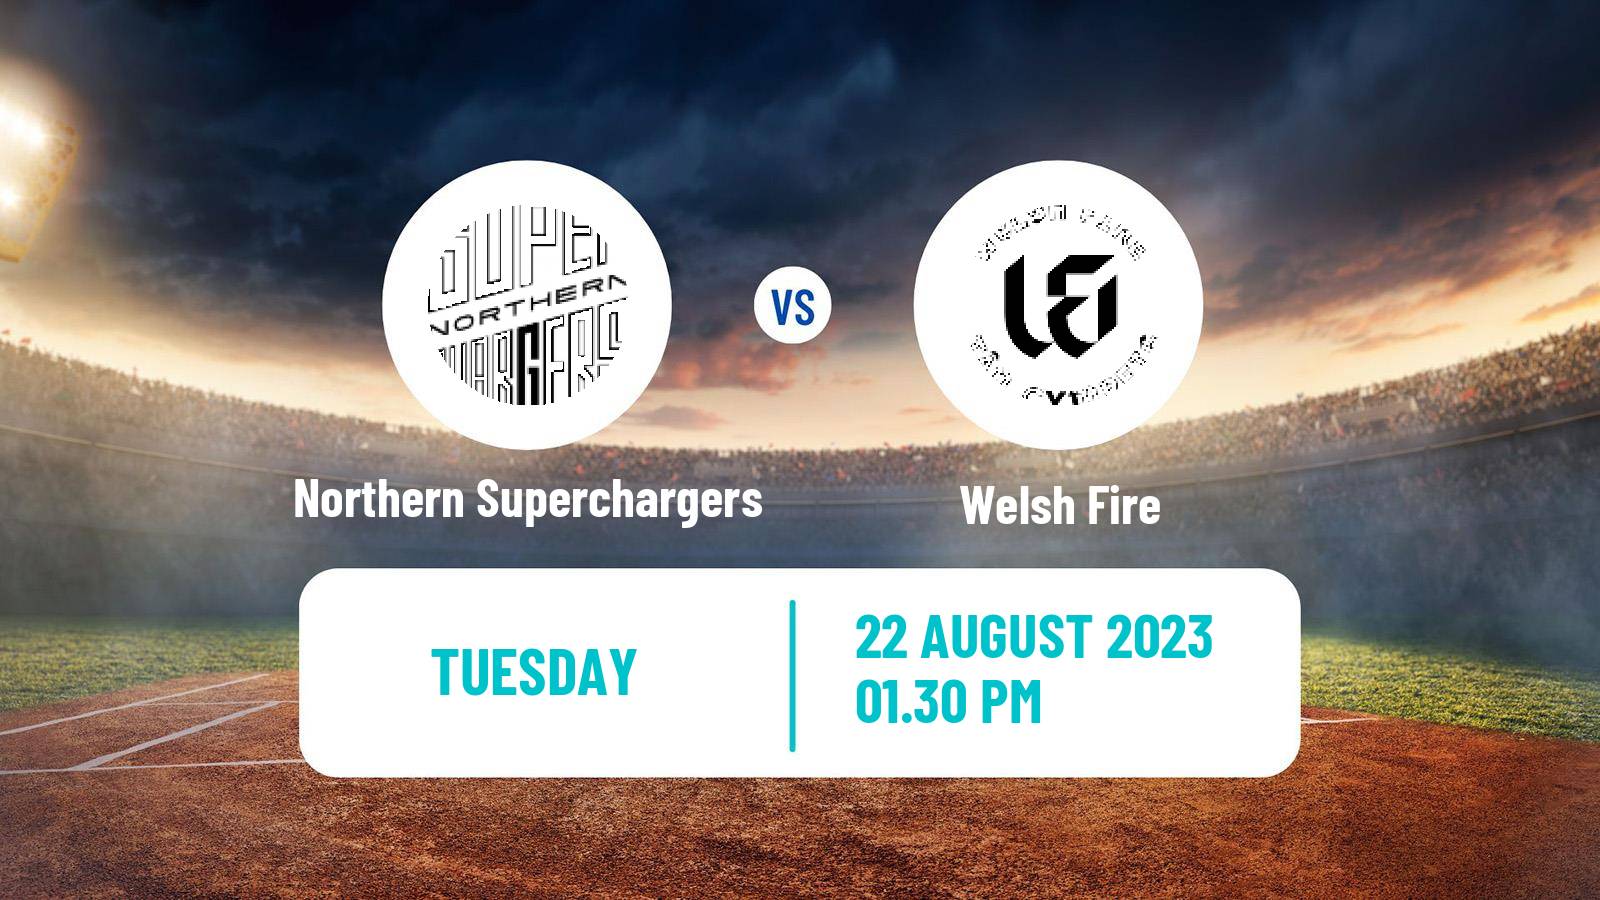 Cricket United Kingdom The Hundred Cricket Northern Superchargers - Welsh Fire